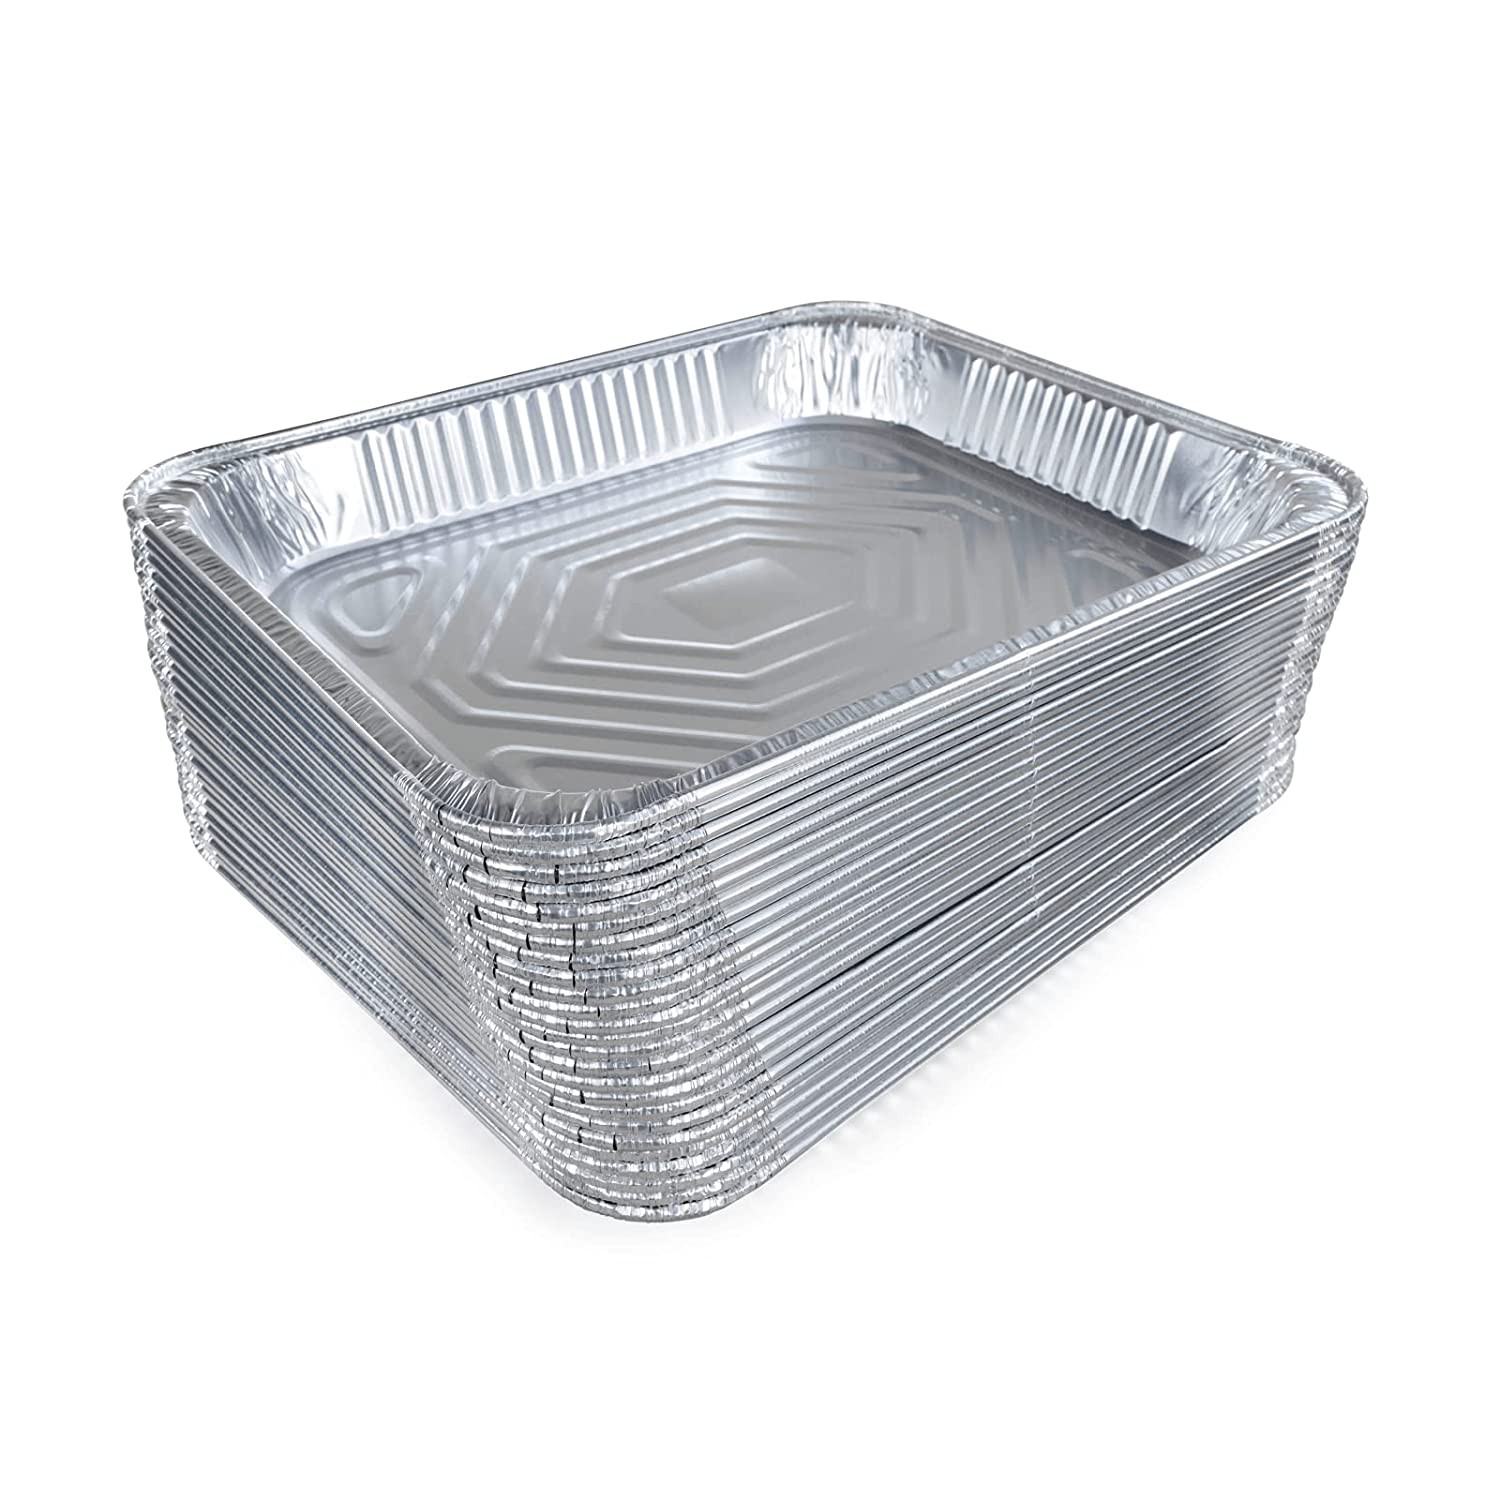 13 x 11 x 3 Half-Size Aluminum Steam Table Pans with Lids, Deep buy in  stock in U.S. in IDL Packaging